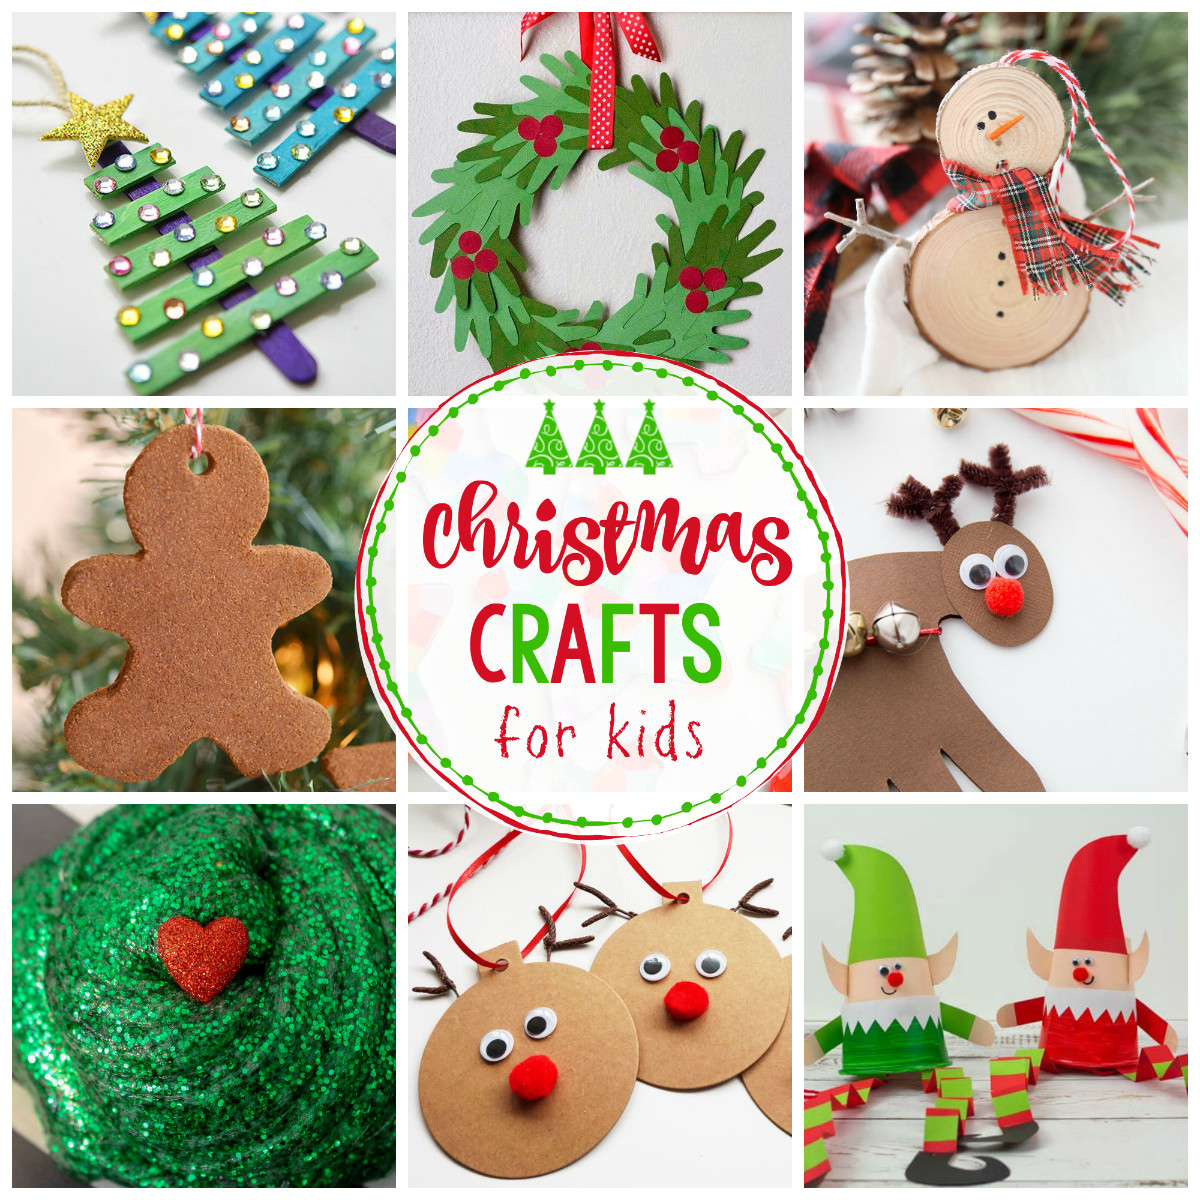 DIY Kids Christmas Craft
 25 Easy Christmas Crafts for Kids Crazy Little Projects